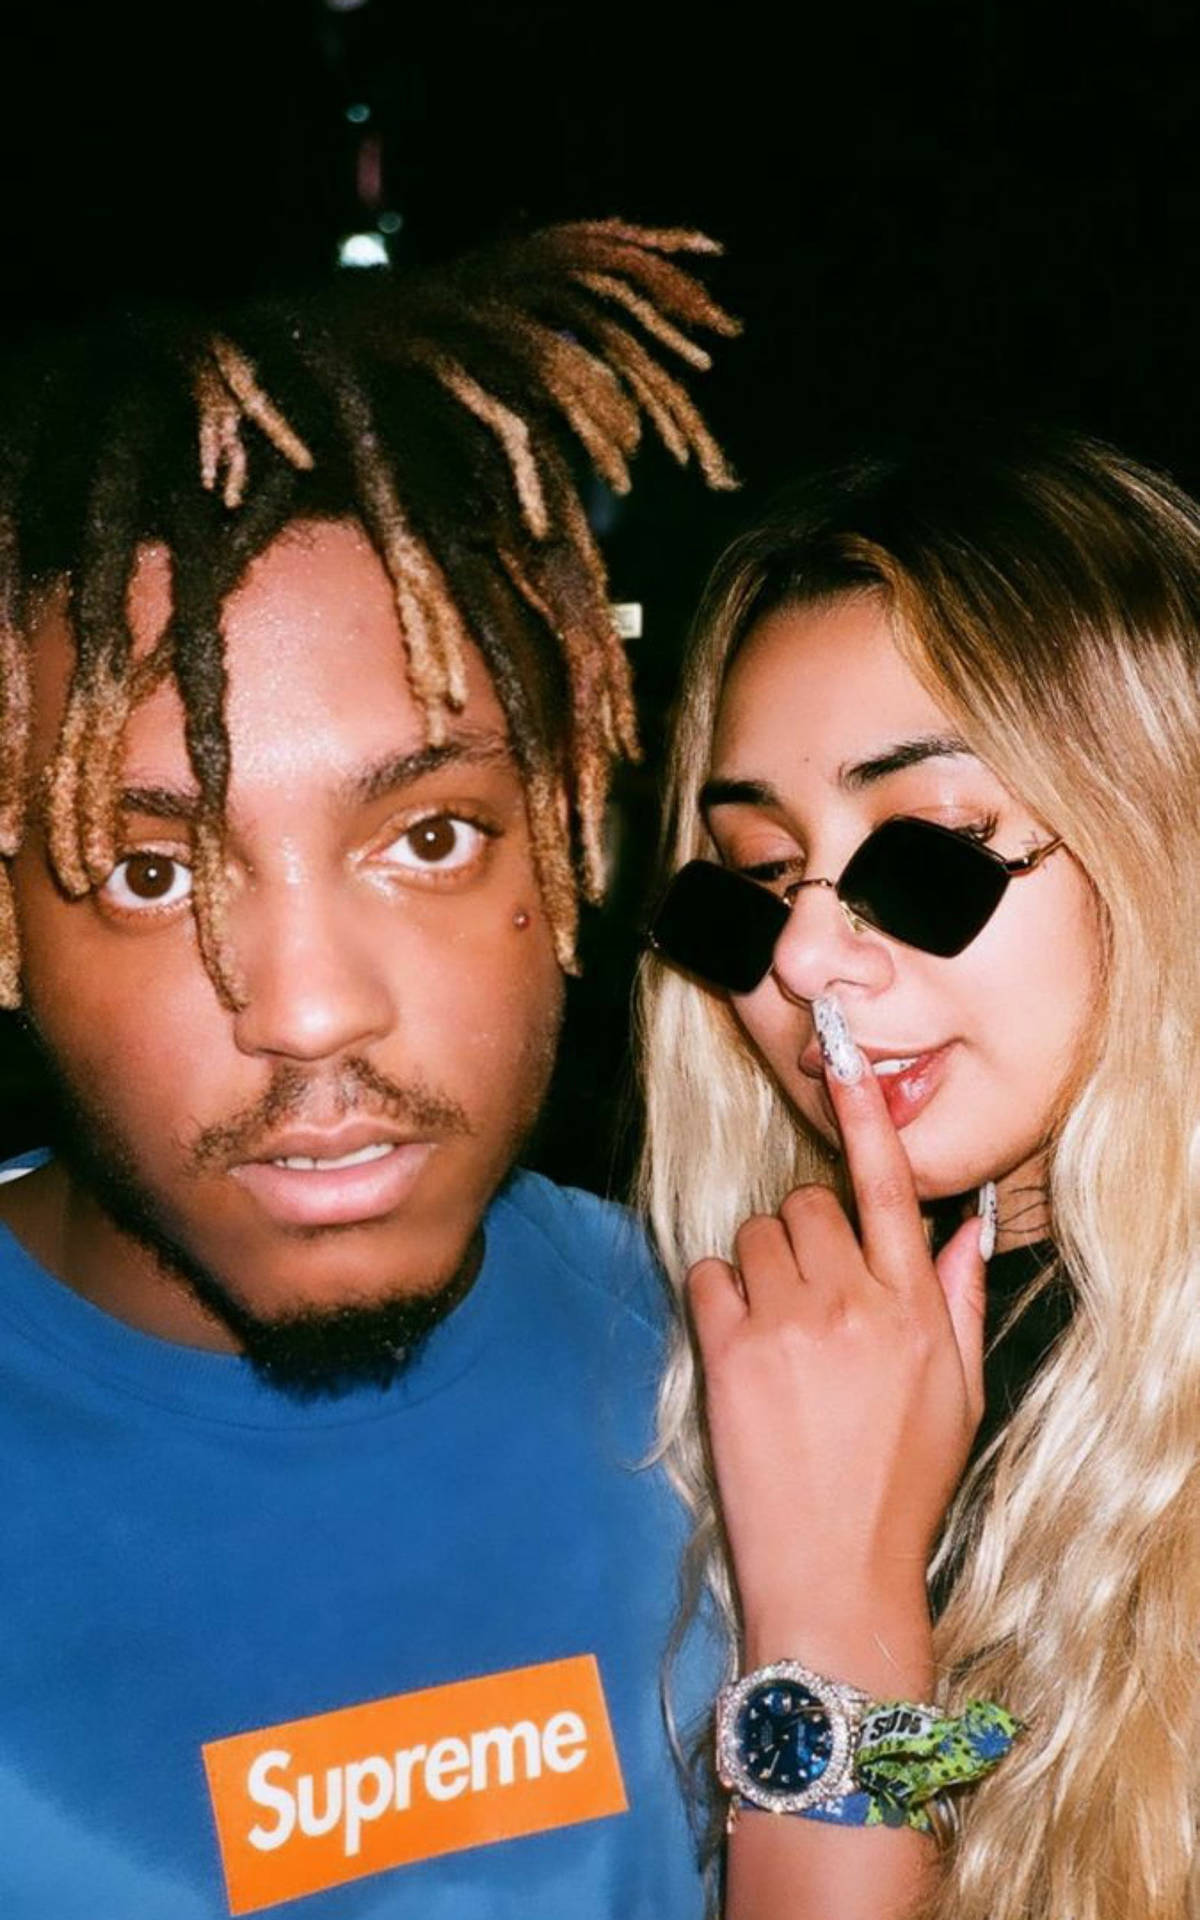 Juice Wrld And Ally Up-close Background